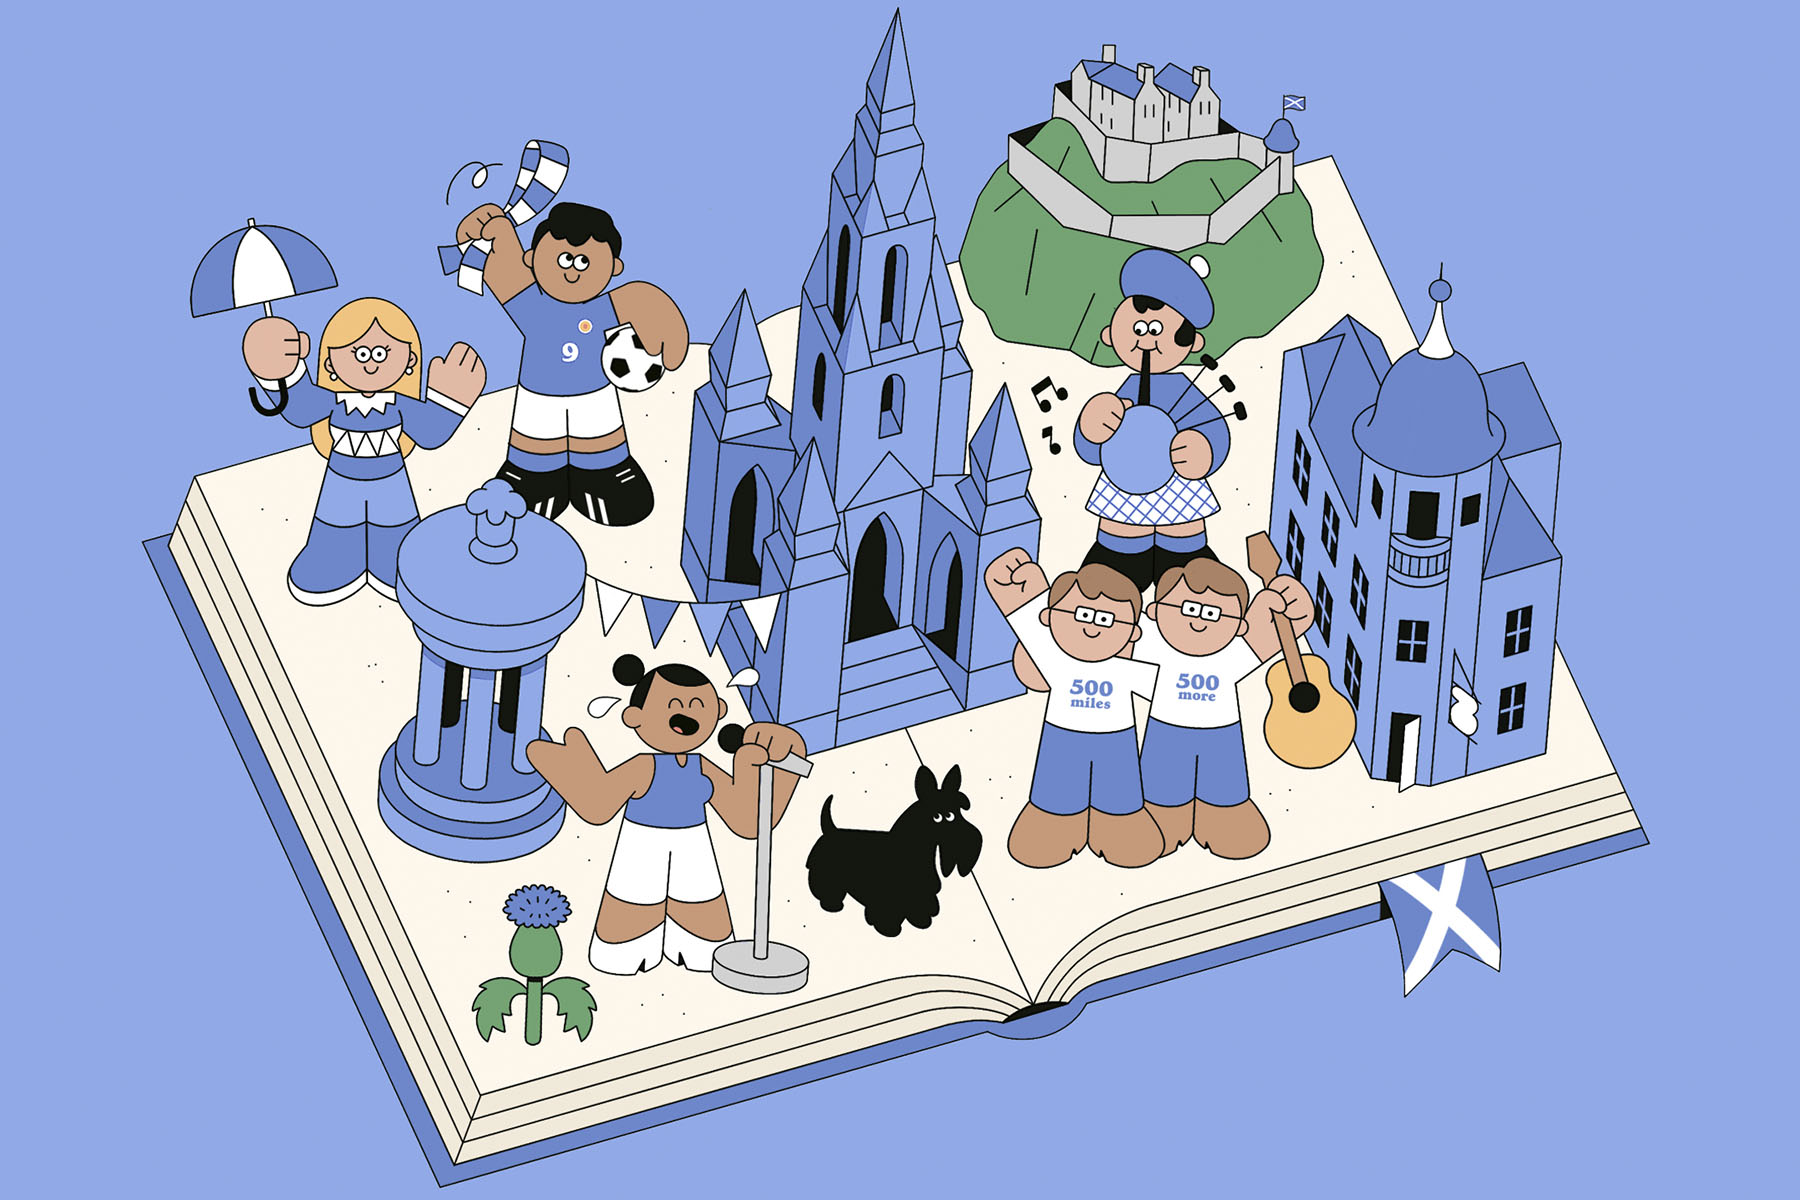 A cartoonish illustration of an open book on whose pages stand several famous Scottish landmarks, a bagpipe player, a Scottish terrier and more, all in blues and whites, like the Scottish flag.